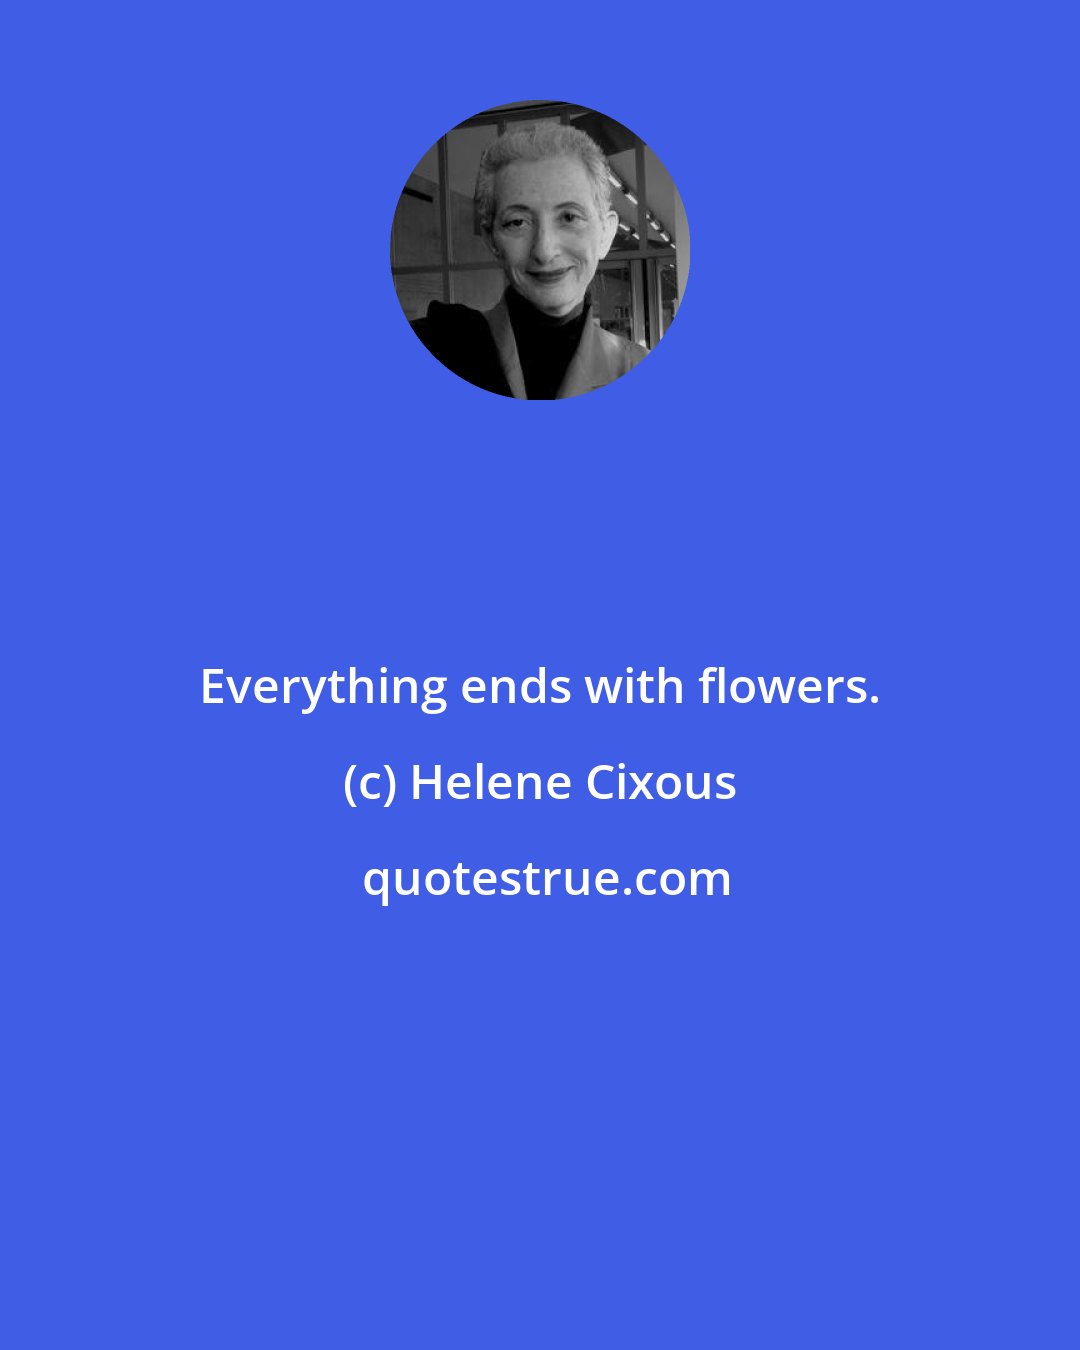 Helene Cixous: Everything ends with flowers.